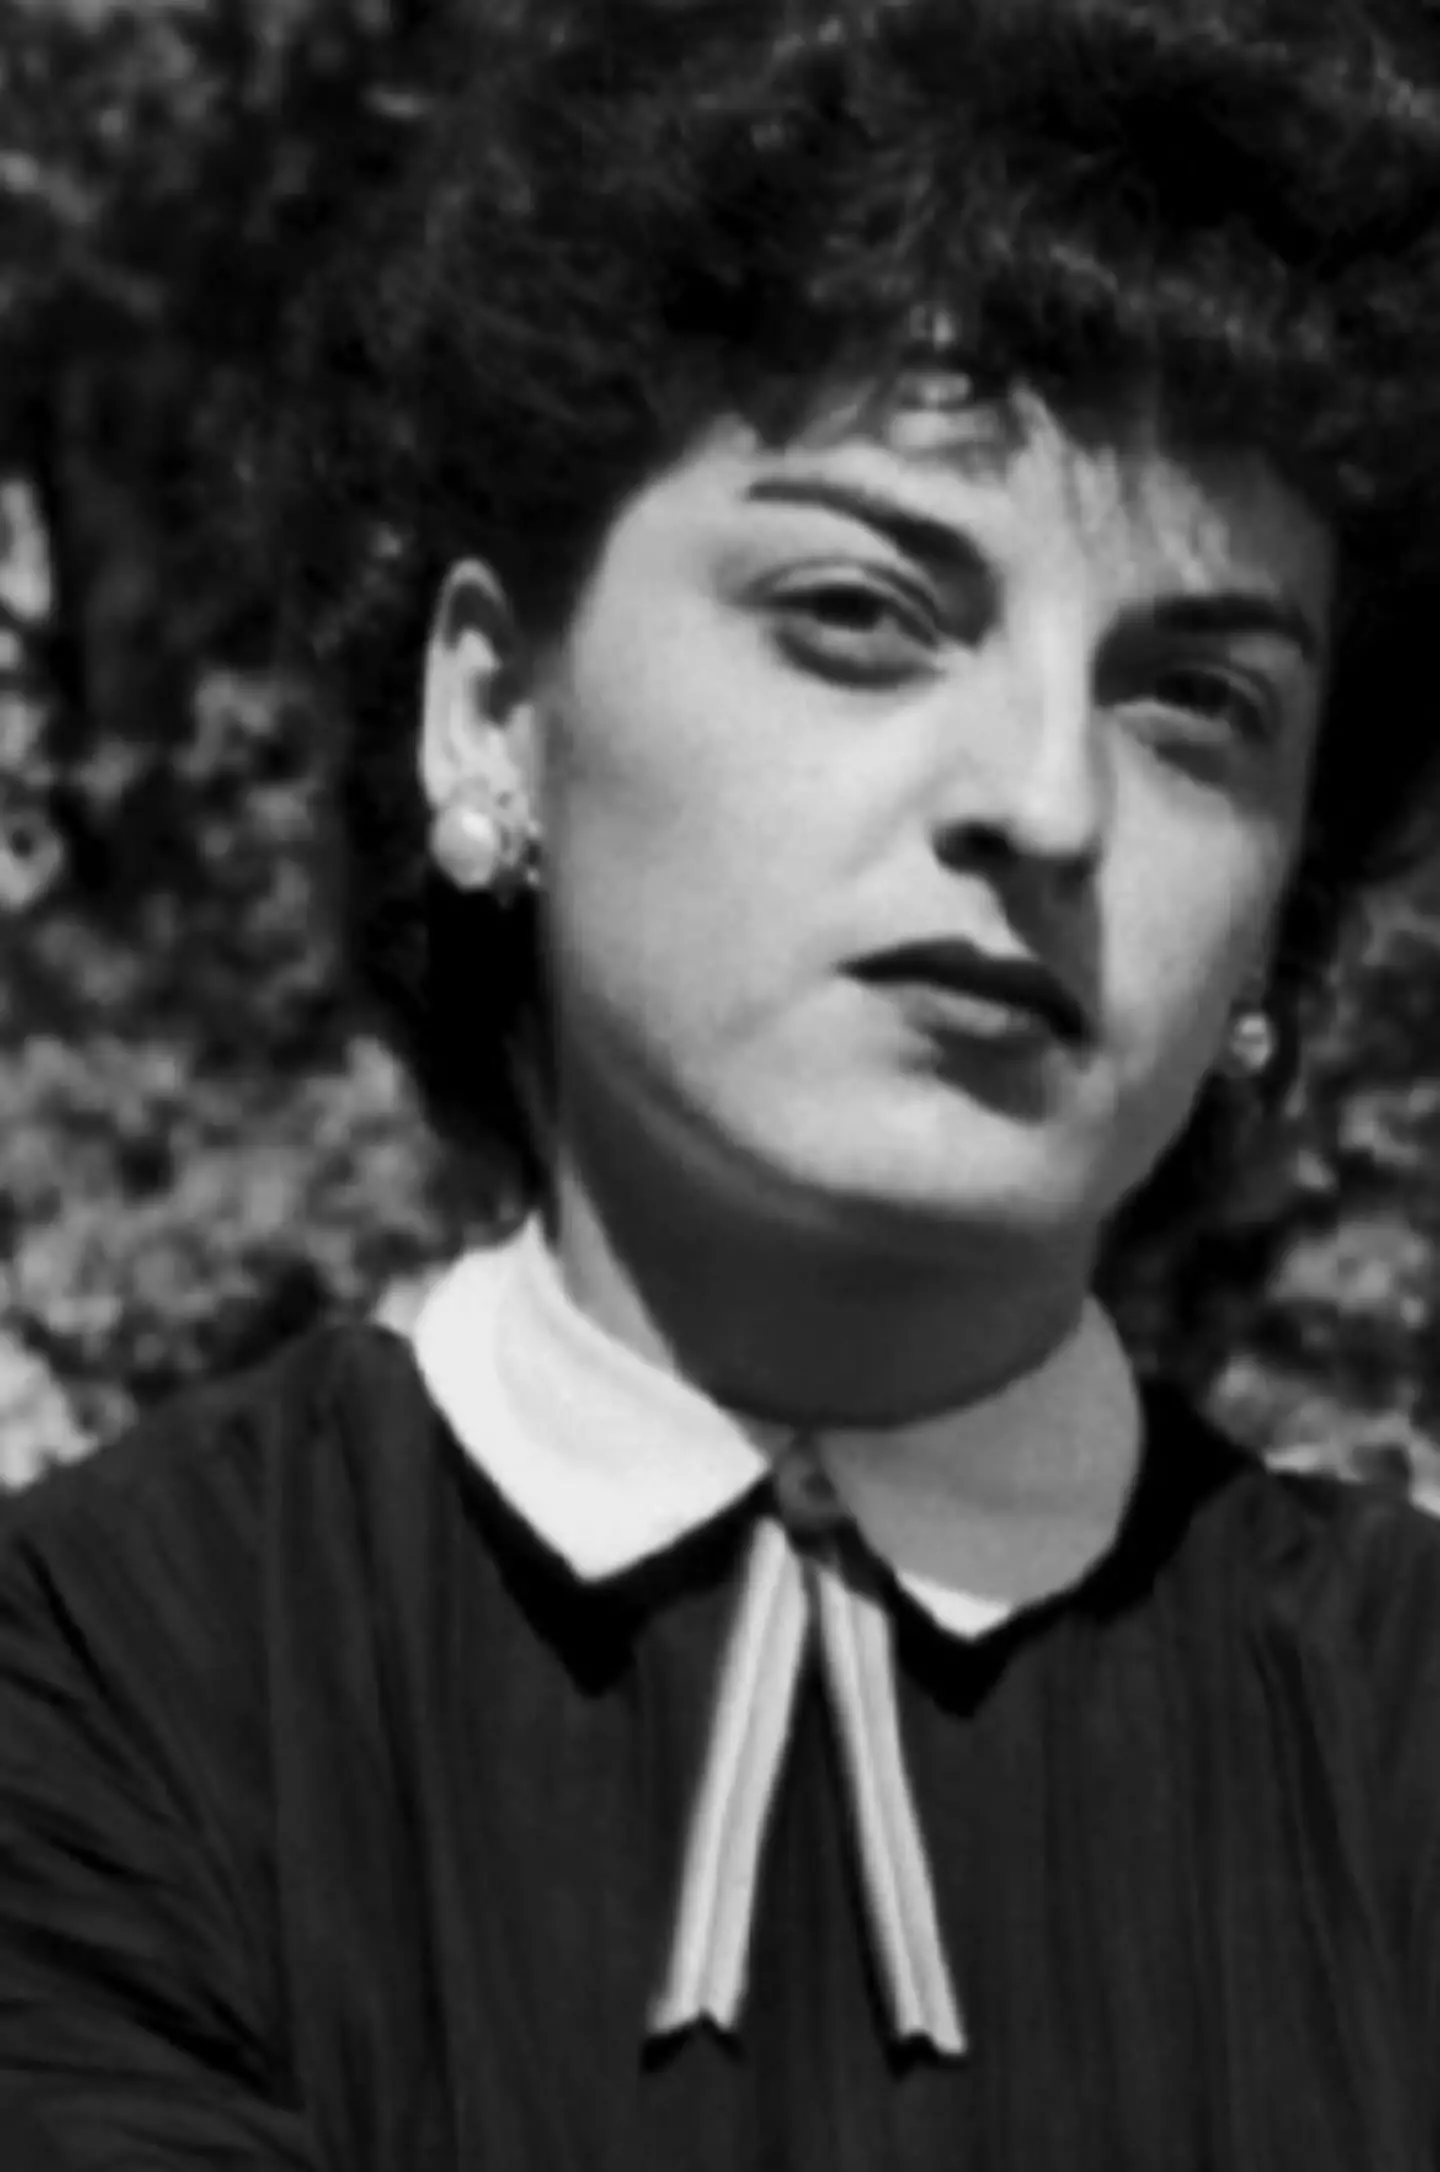 Officials confirm criminal charges against Carolyn Bryant Donham over Emmett Till's death won't be pursued.